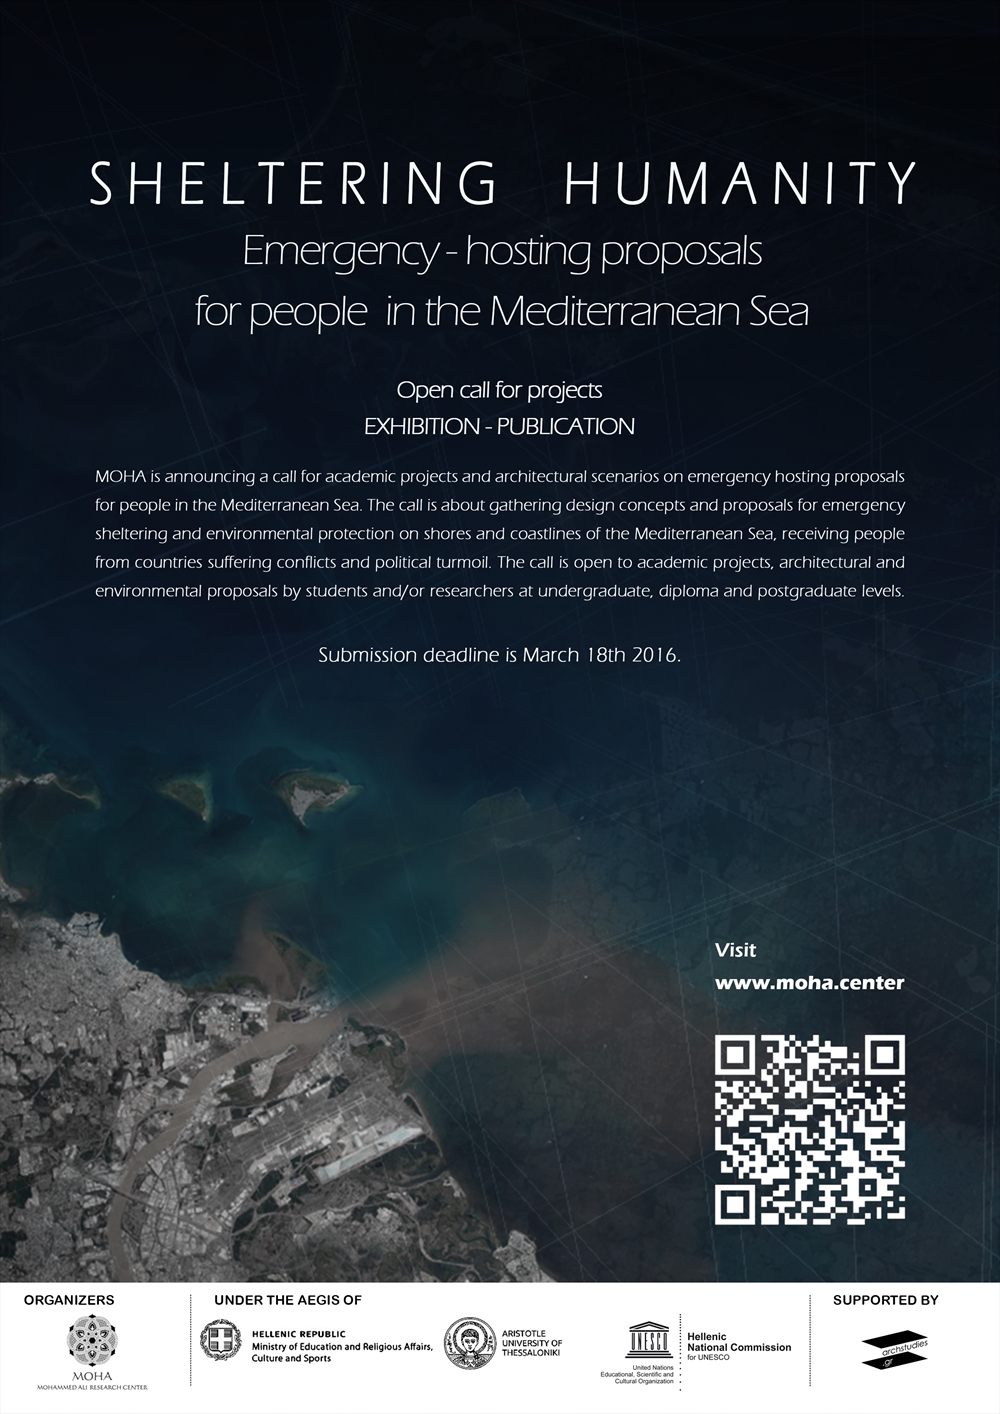 Archisearch CALL FOR PROJECTS: SHELTERING HUMANITY / EMERGENCY-HOSTING PROPOSALS IN THE MEDITERRANEAN SEA